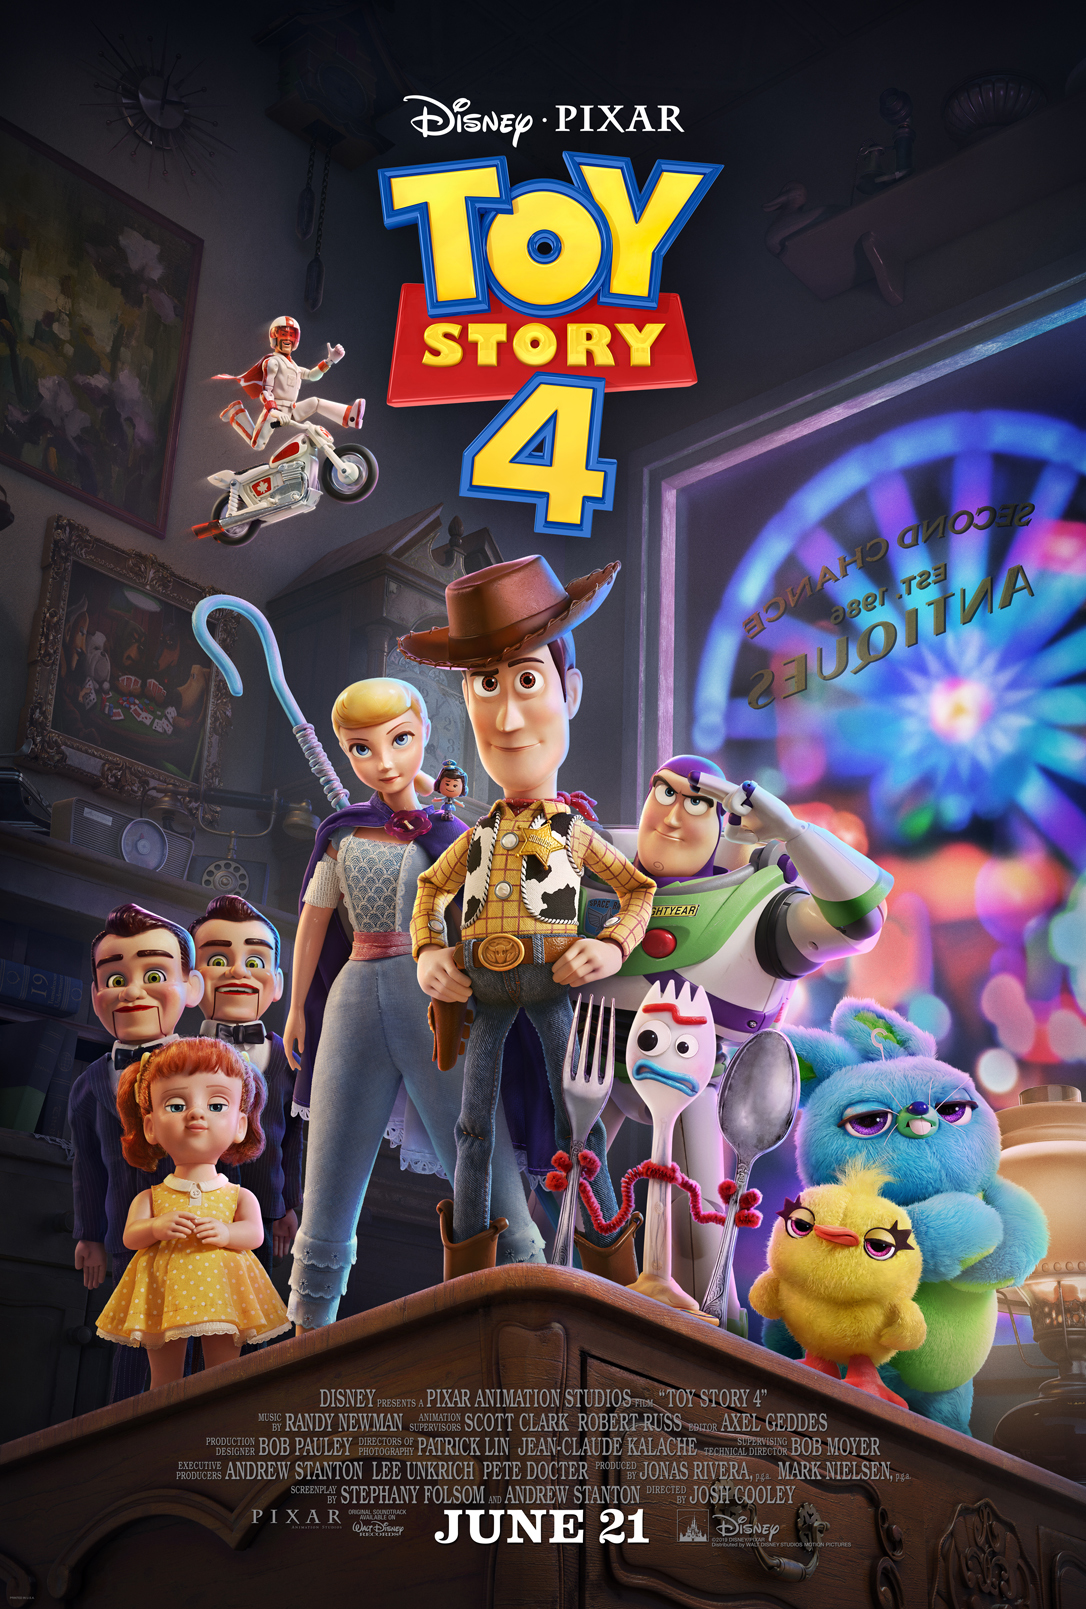 An Evil Jackhammer! - Toy Story 2: Buzz Lightyear to the Rescue #3 